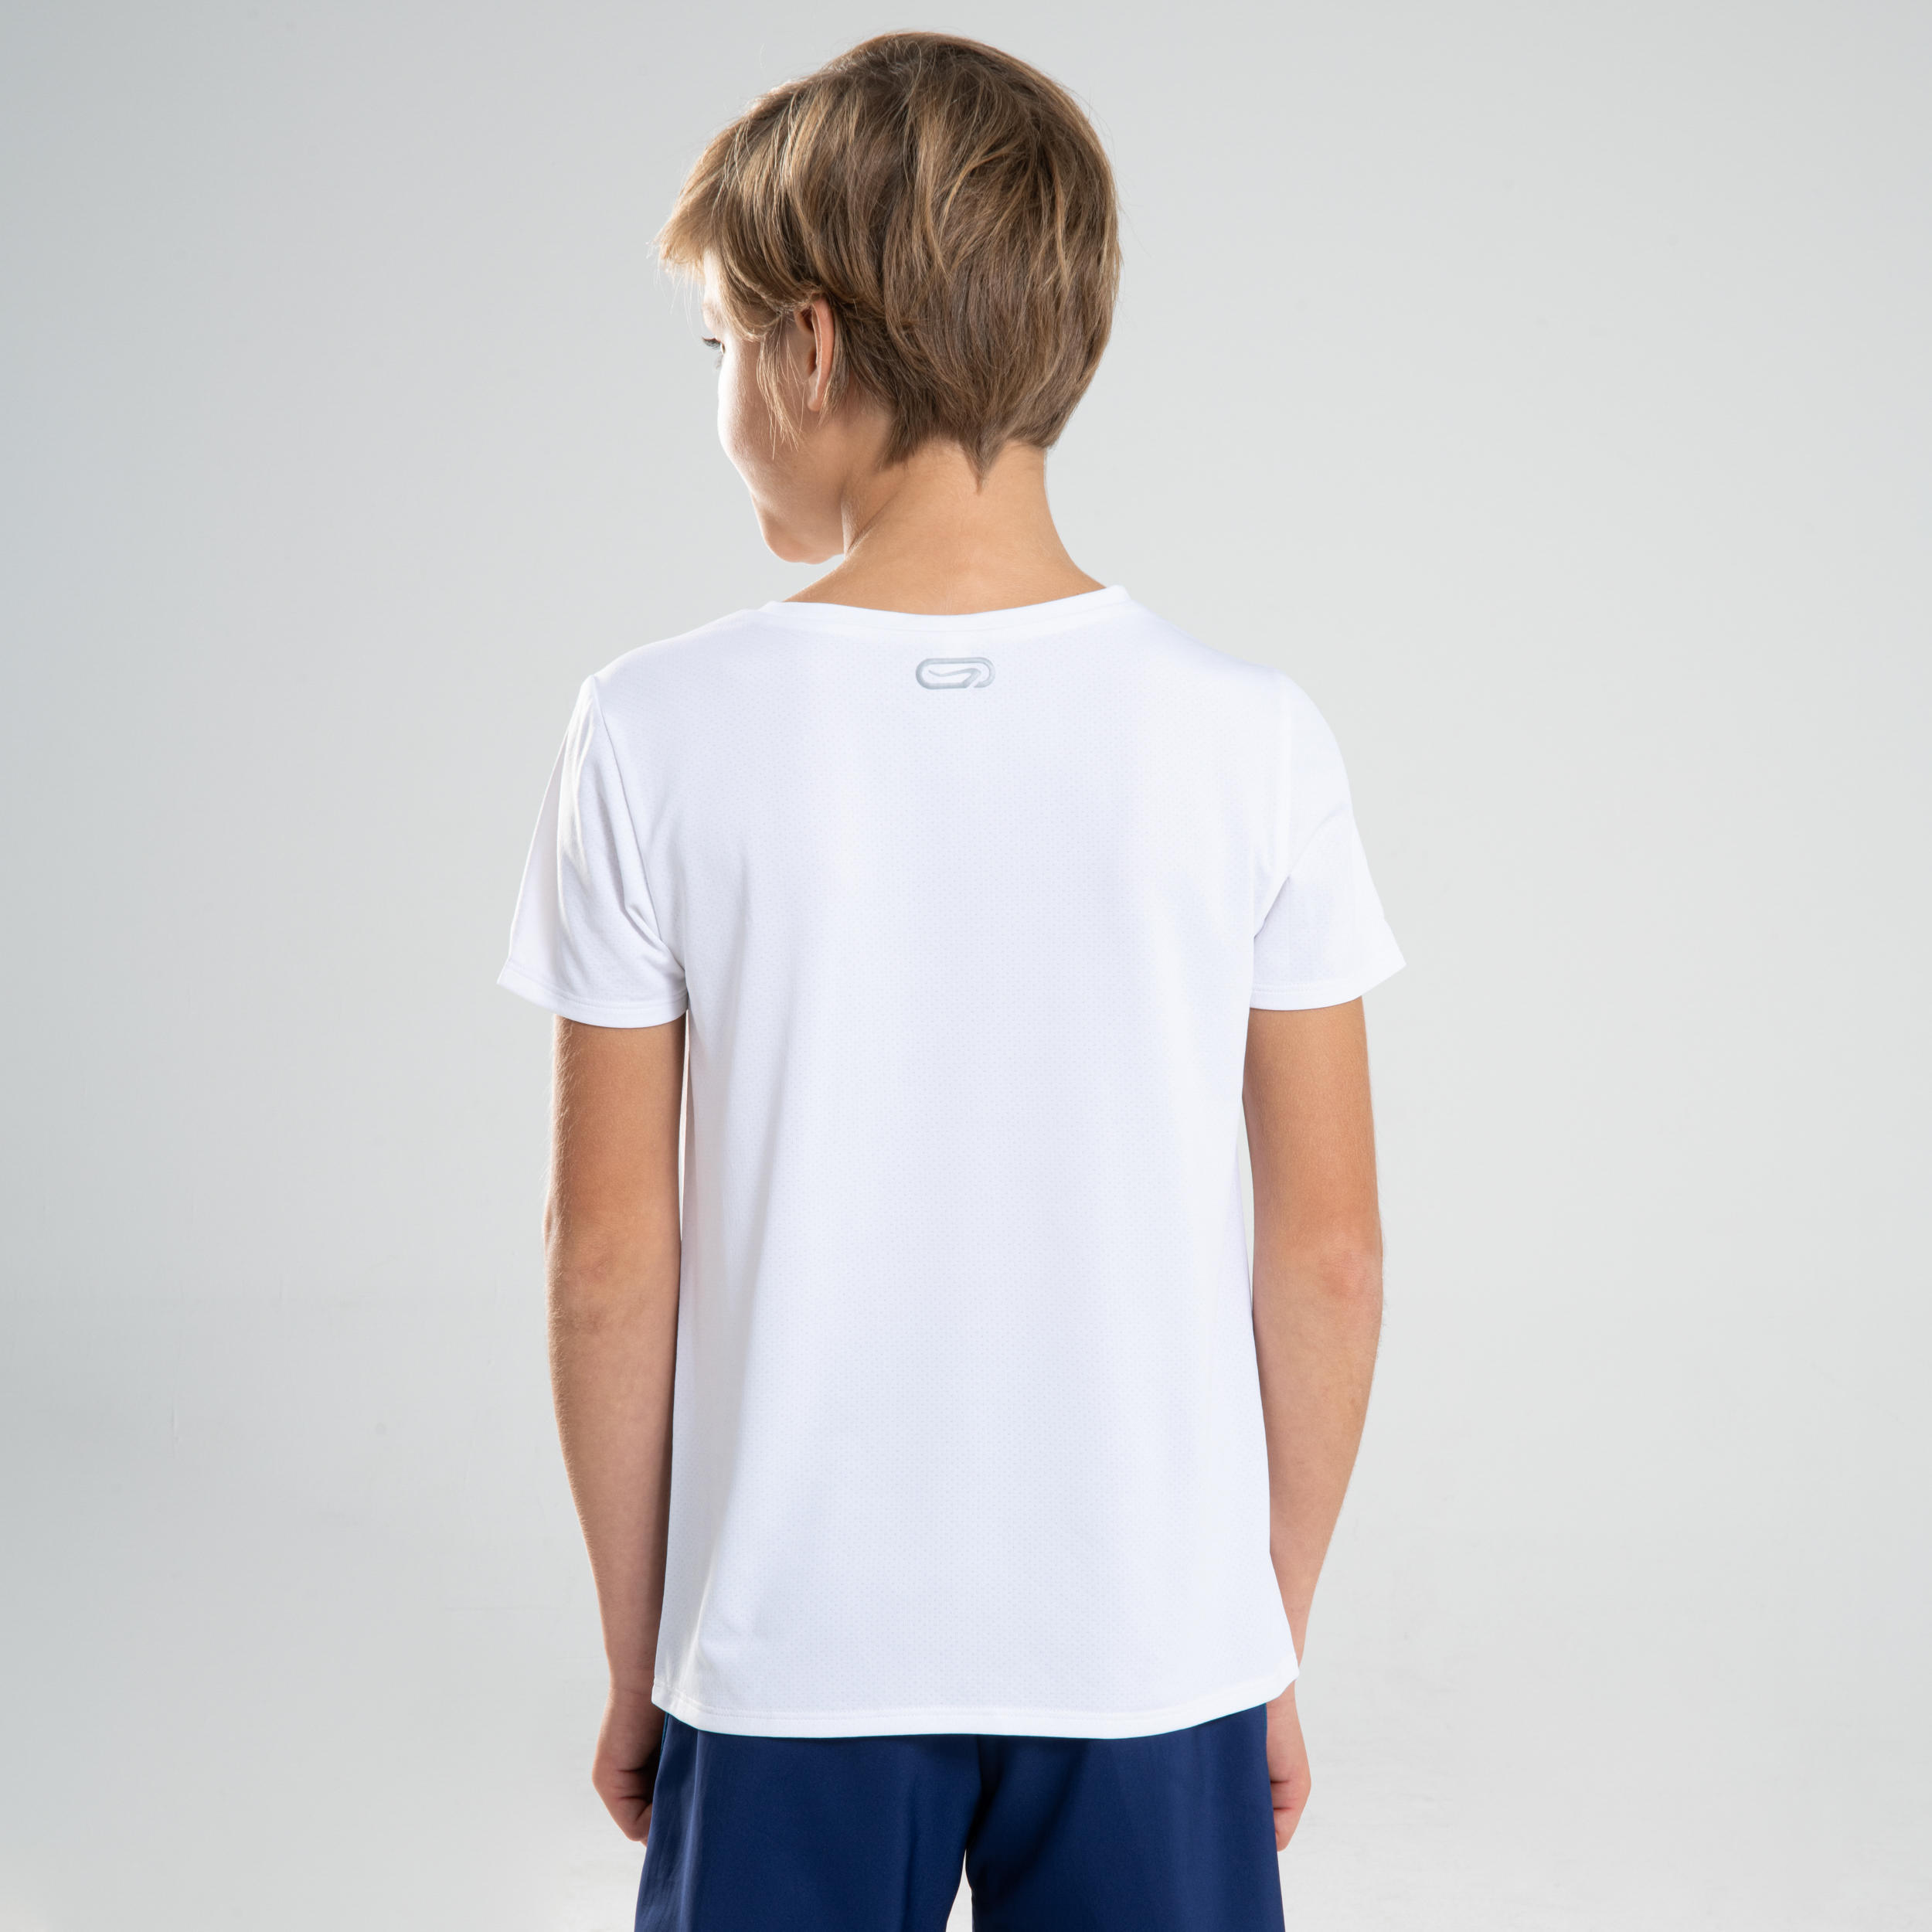 Kids' Breathable T-Shirt 4/8